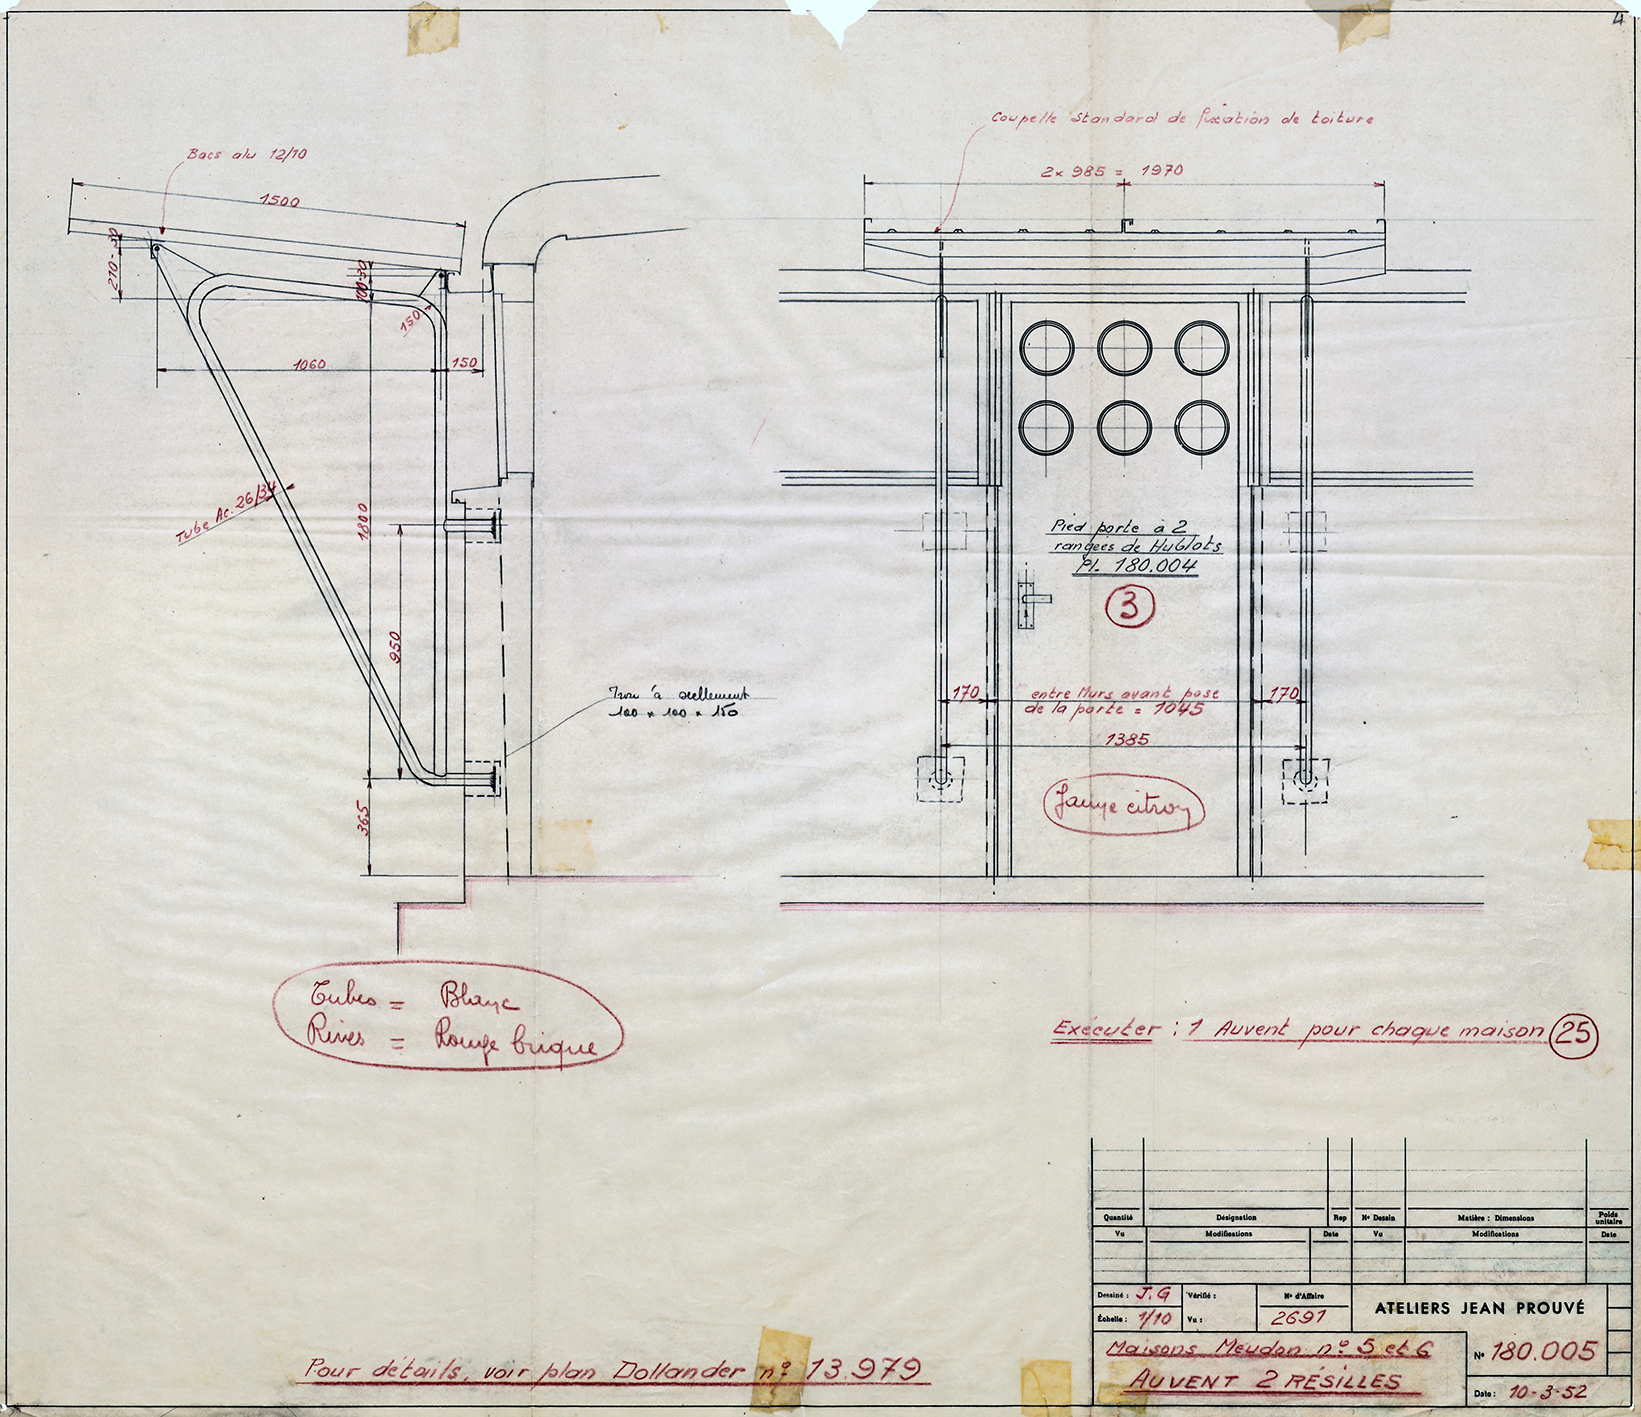 Ateliers Jean Prouvé, “Meudon houses nos. 5 and 6. Double grid awning”. Awning, porthole door, and indications of component colors. Plan no. 180.005, 10 March 1952.